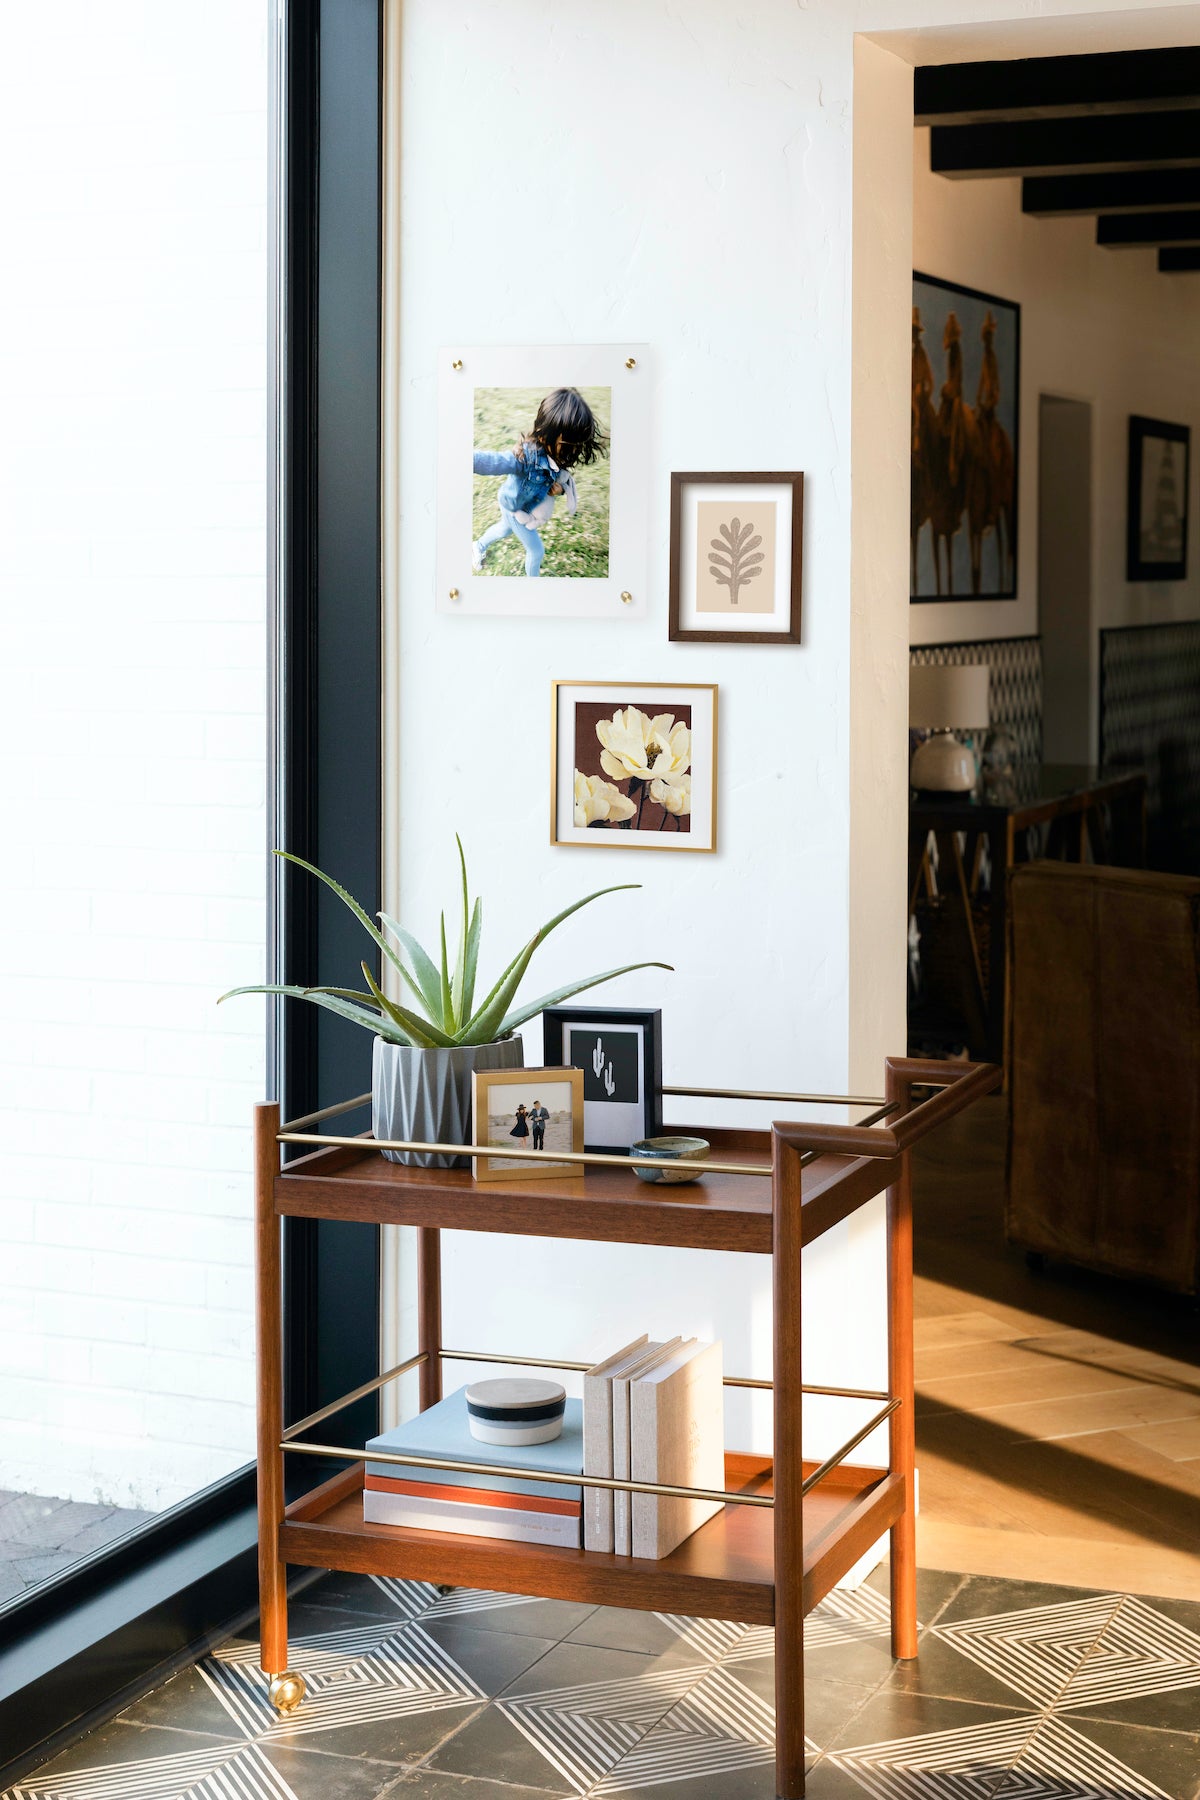 A corner filled with frames, a side table, photo books, and greenery.